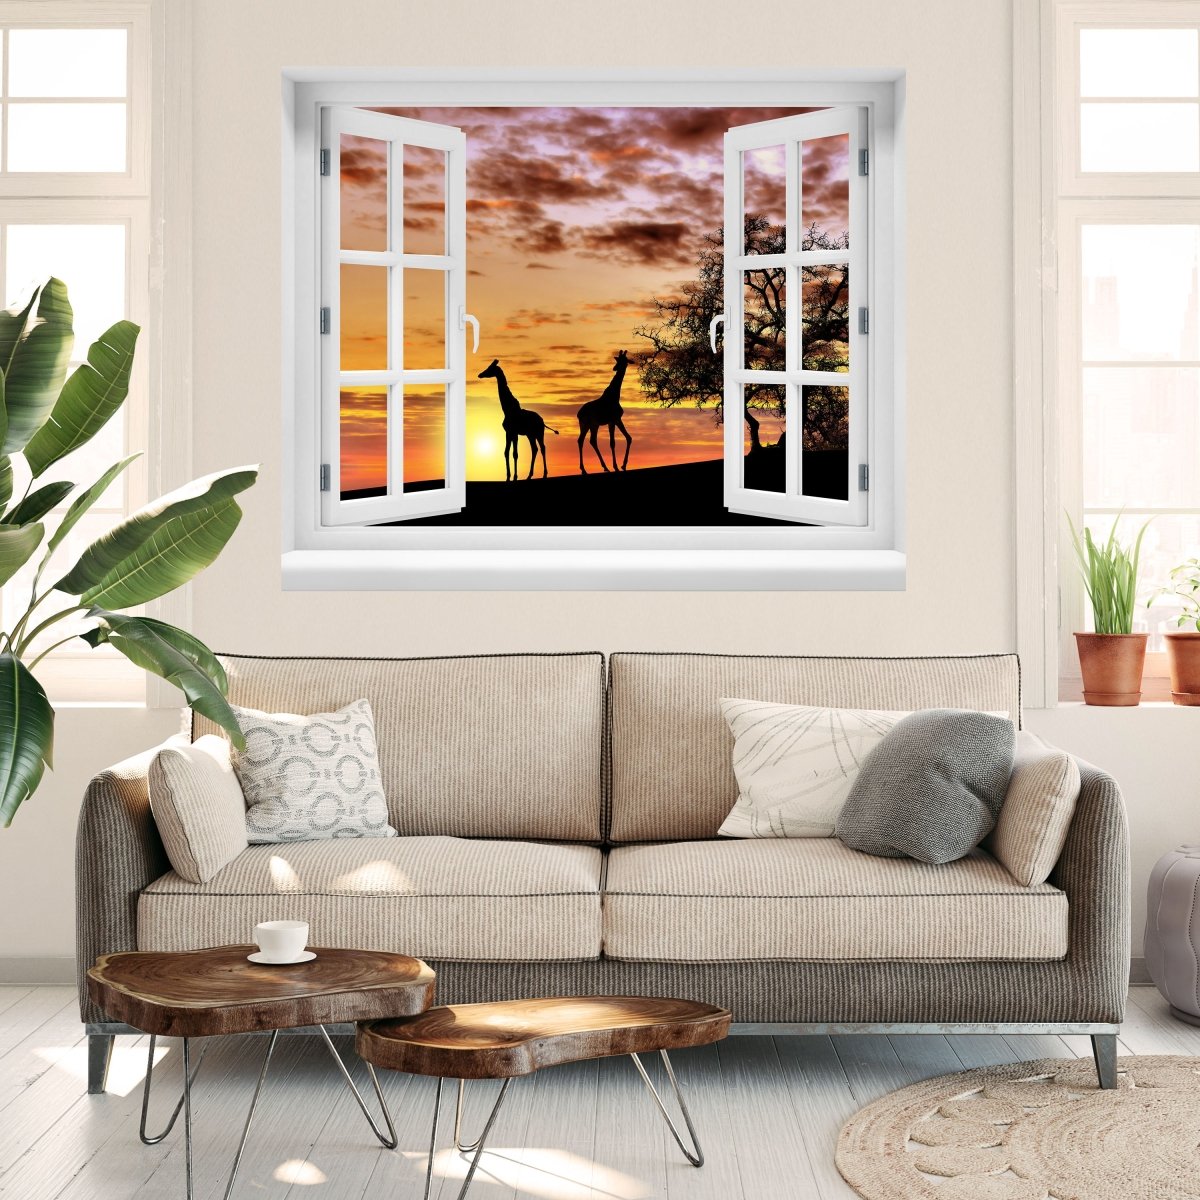 3D wall sticker animals in the sunset - Wall Decal M0518